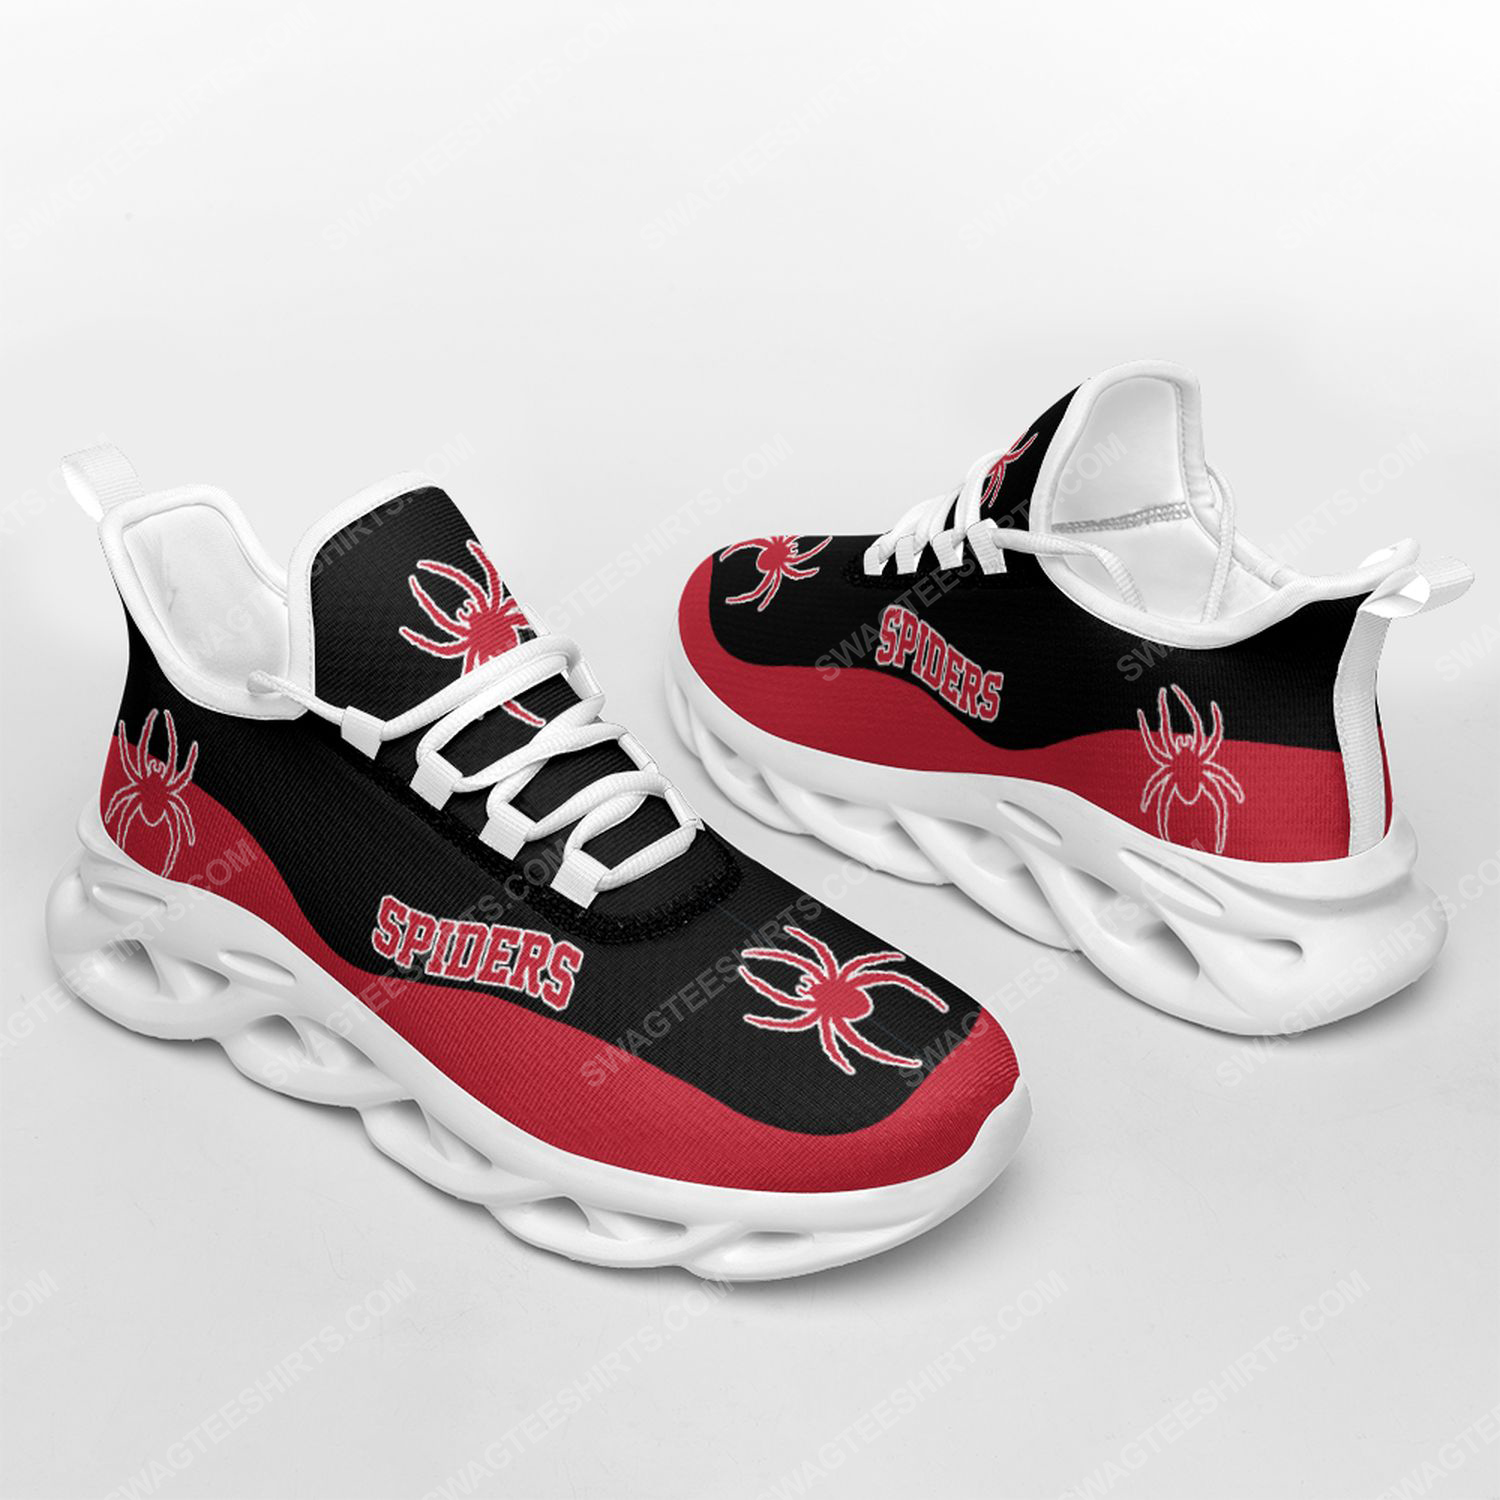 Richmond spiders football team max soul shoes 2